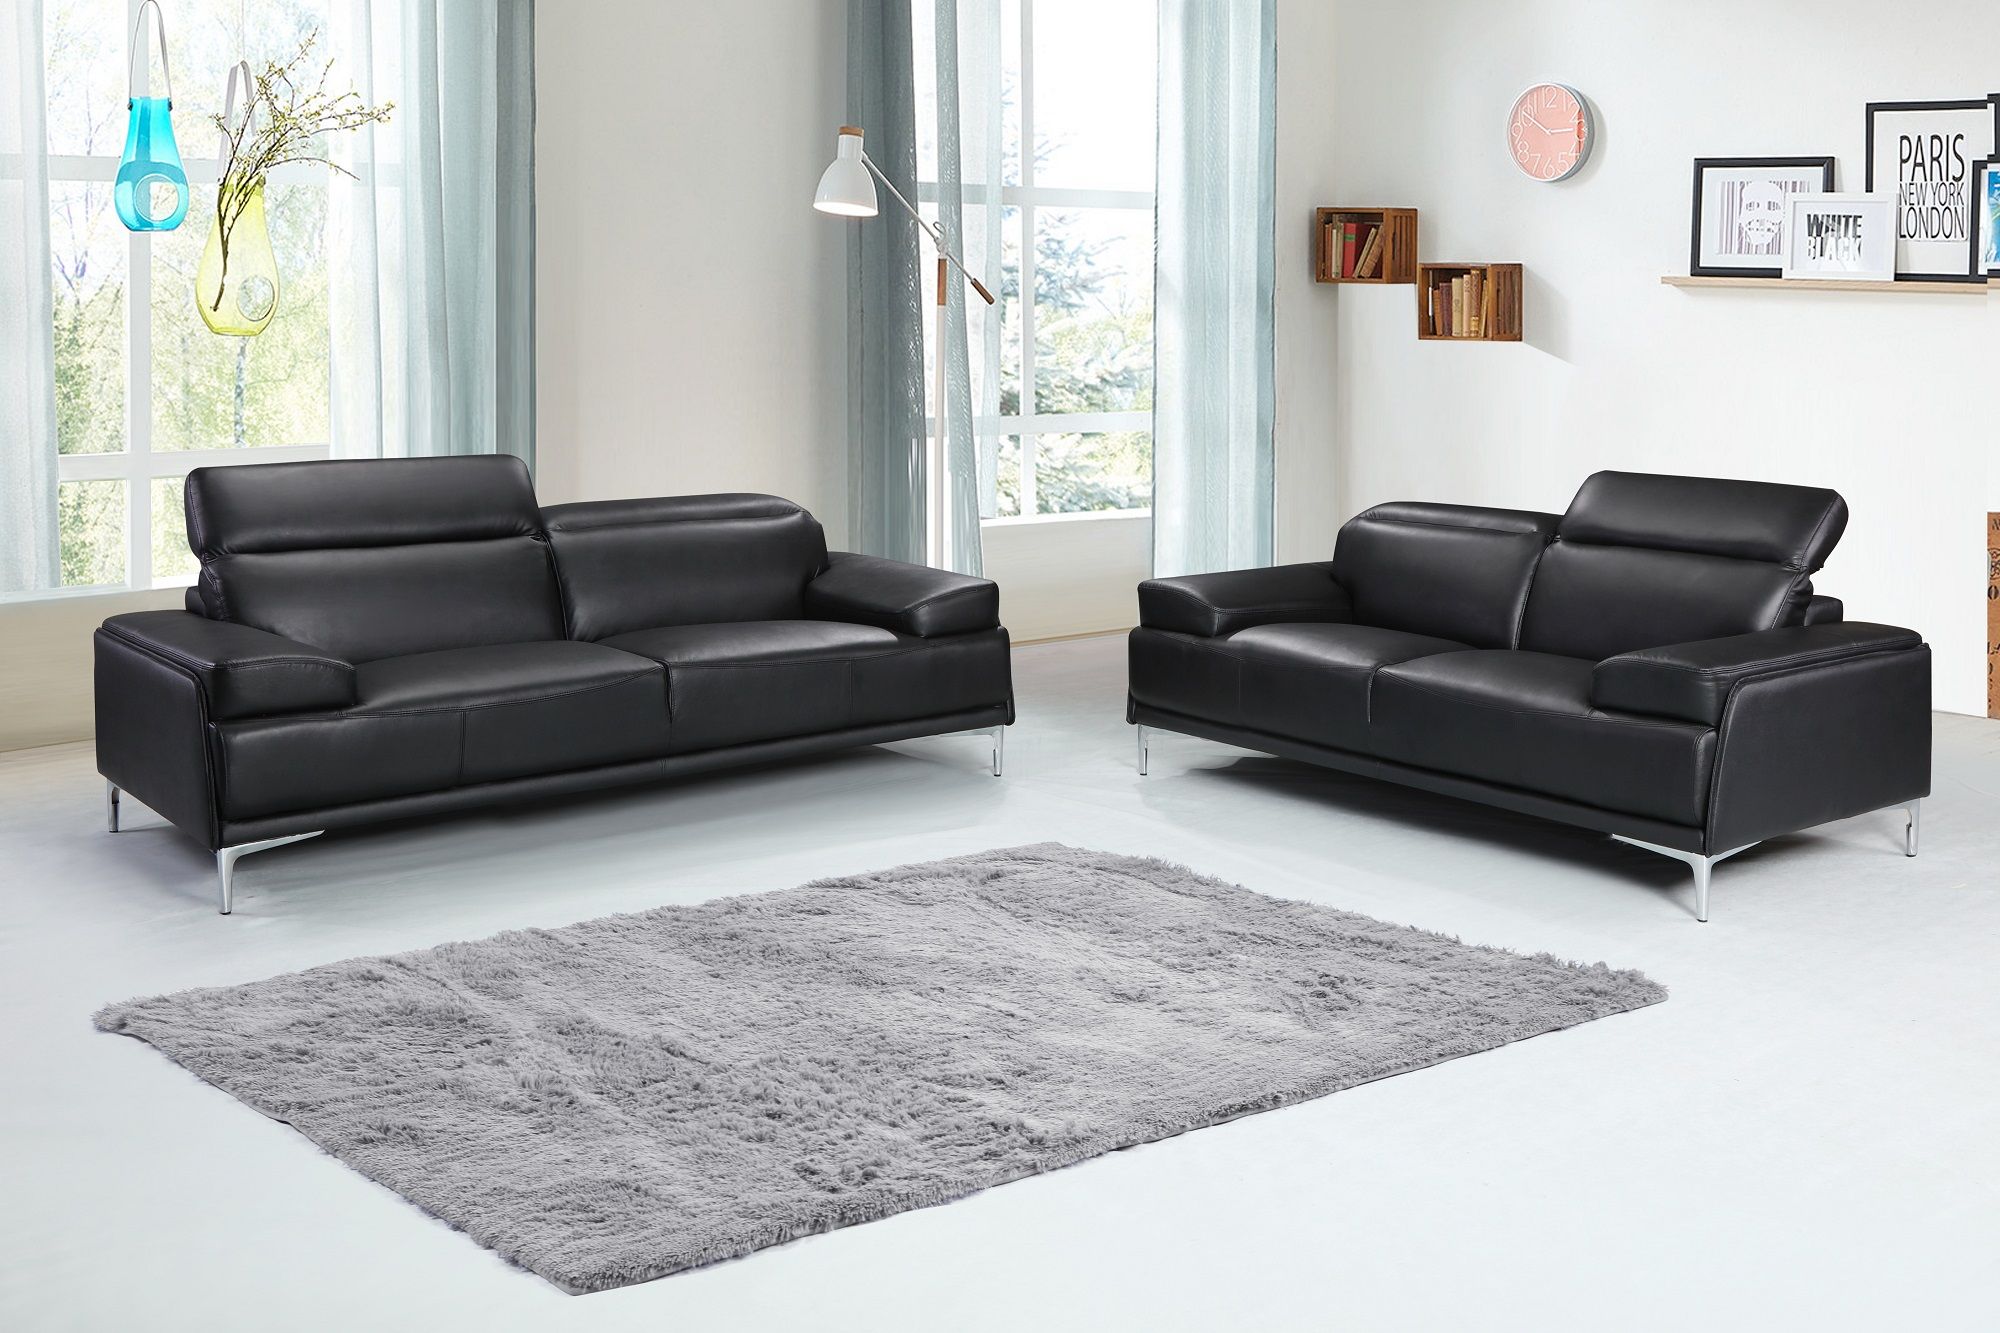 Contemporary Black Leather Living Room Sofa Set Minneapolis Minnesota J With Sofas In Black (View 9 of 20)